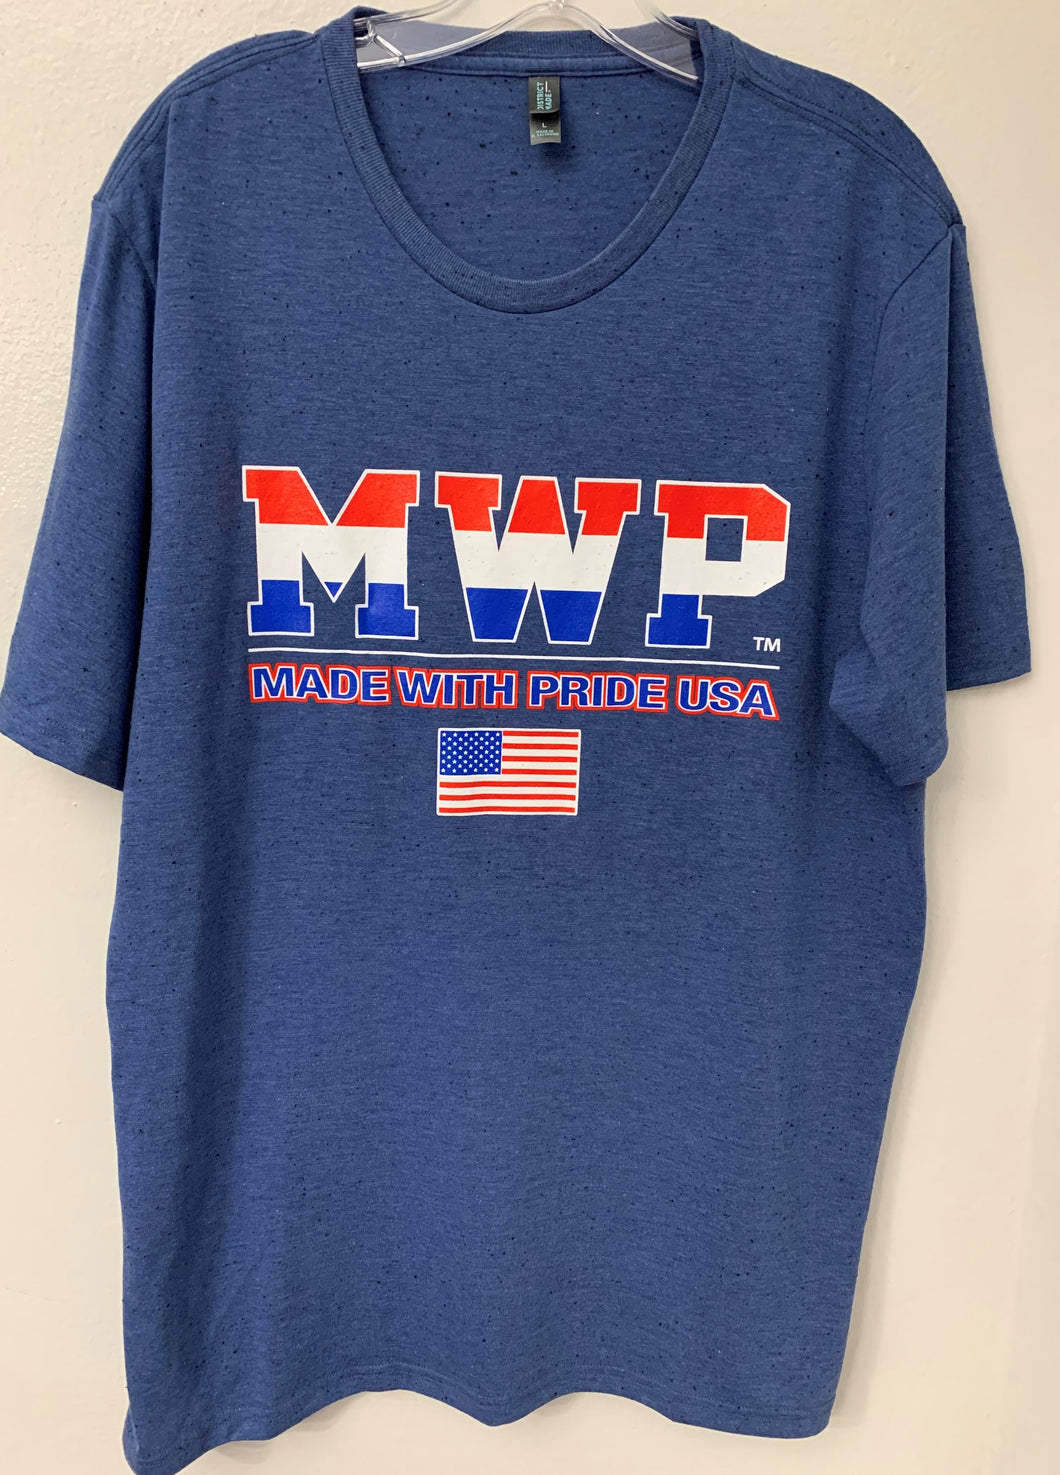 MEN'S MWP (MADE WITH PRIDE USA) TRI-BLEND T-SHIRT